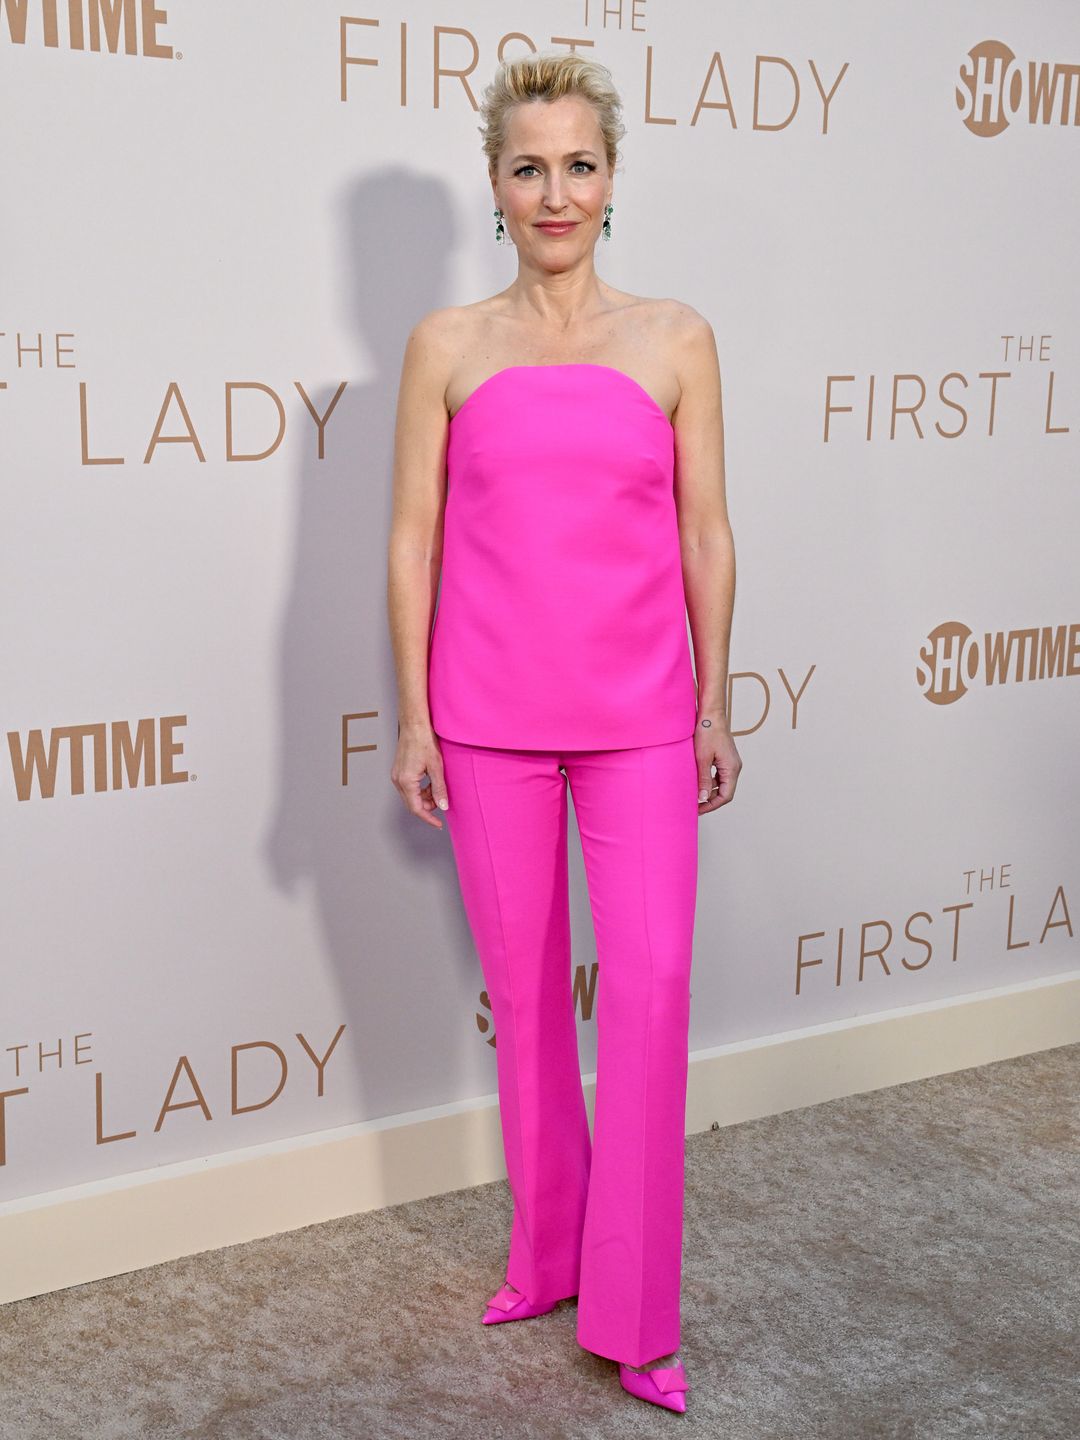 Gillian Anderson attends Showtime's FYC Event and Premiere for "The First Lady" at DGA Theater Complex 